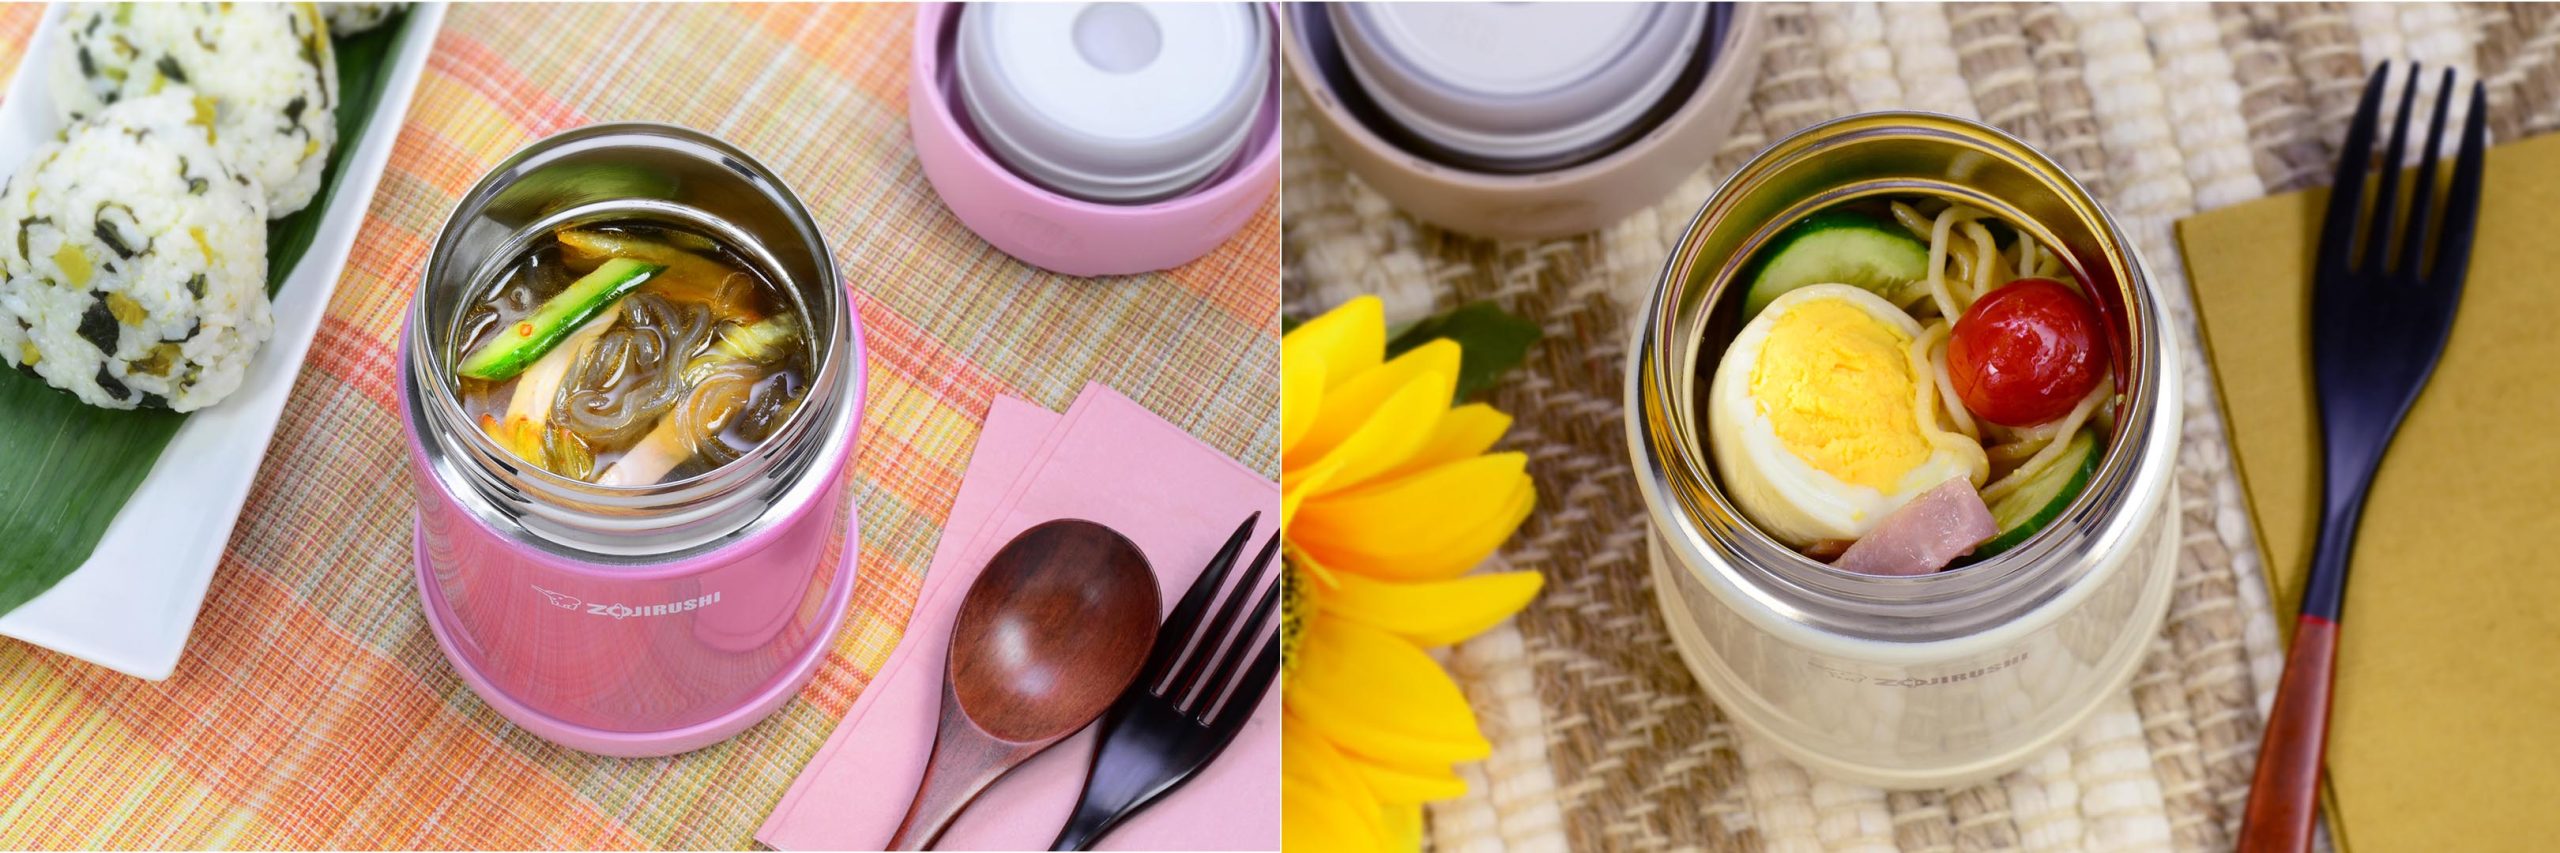 Plan the Perfect Picnic with Zojirushi's Insulated Food Jars - Zojirushi  BlogZojirushi Blog